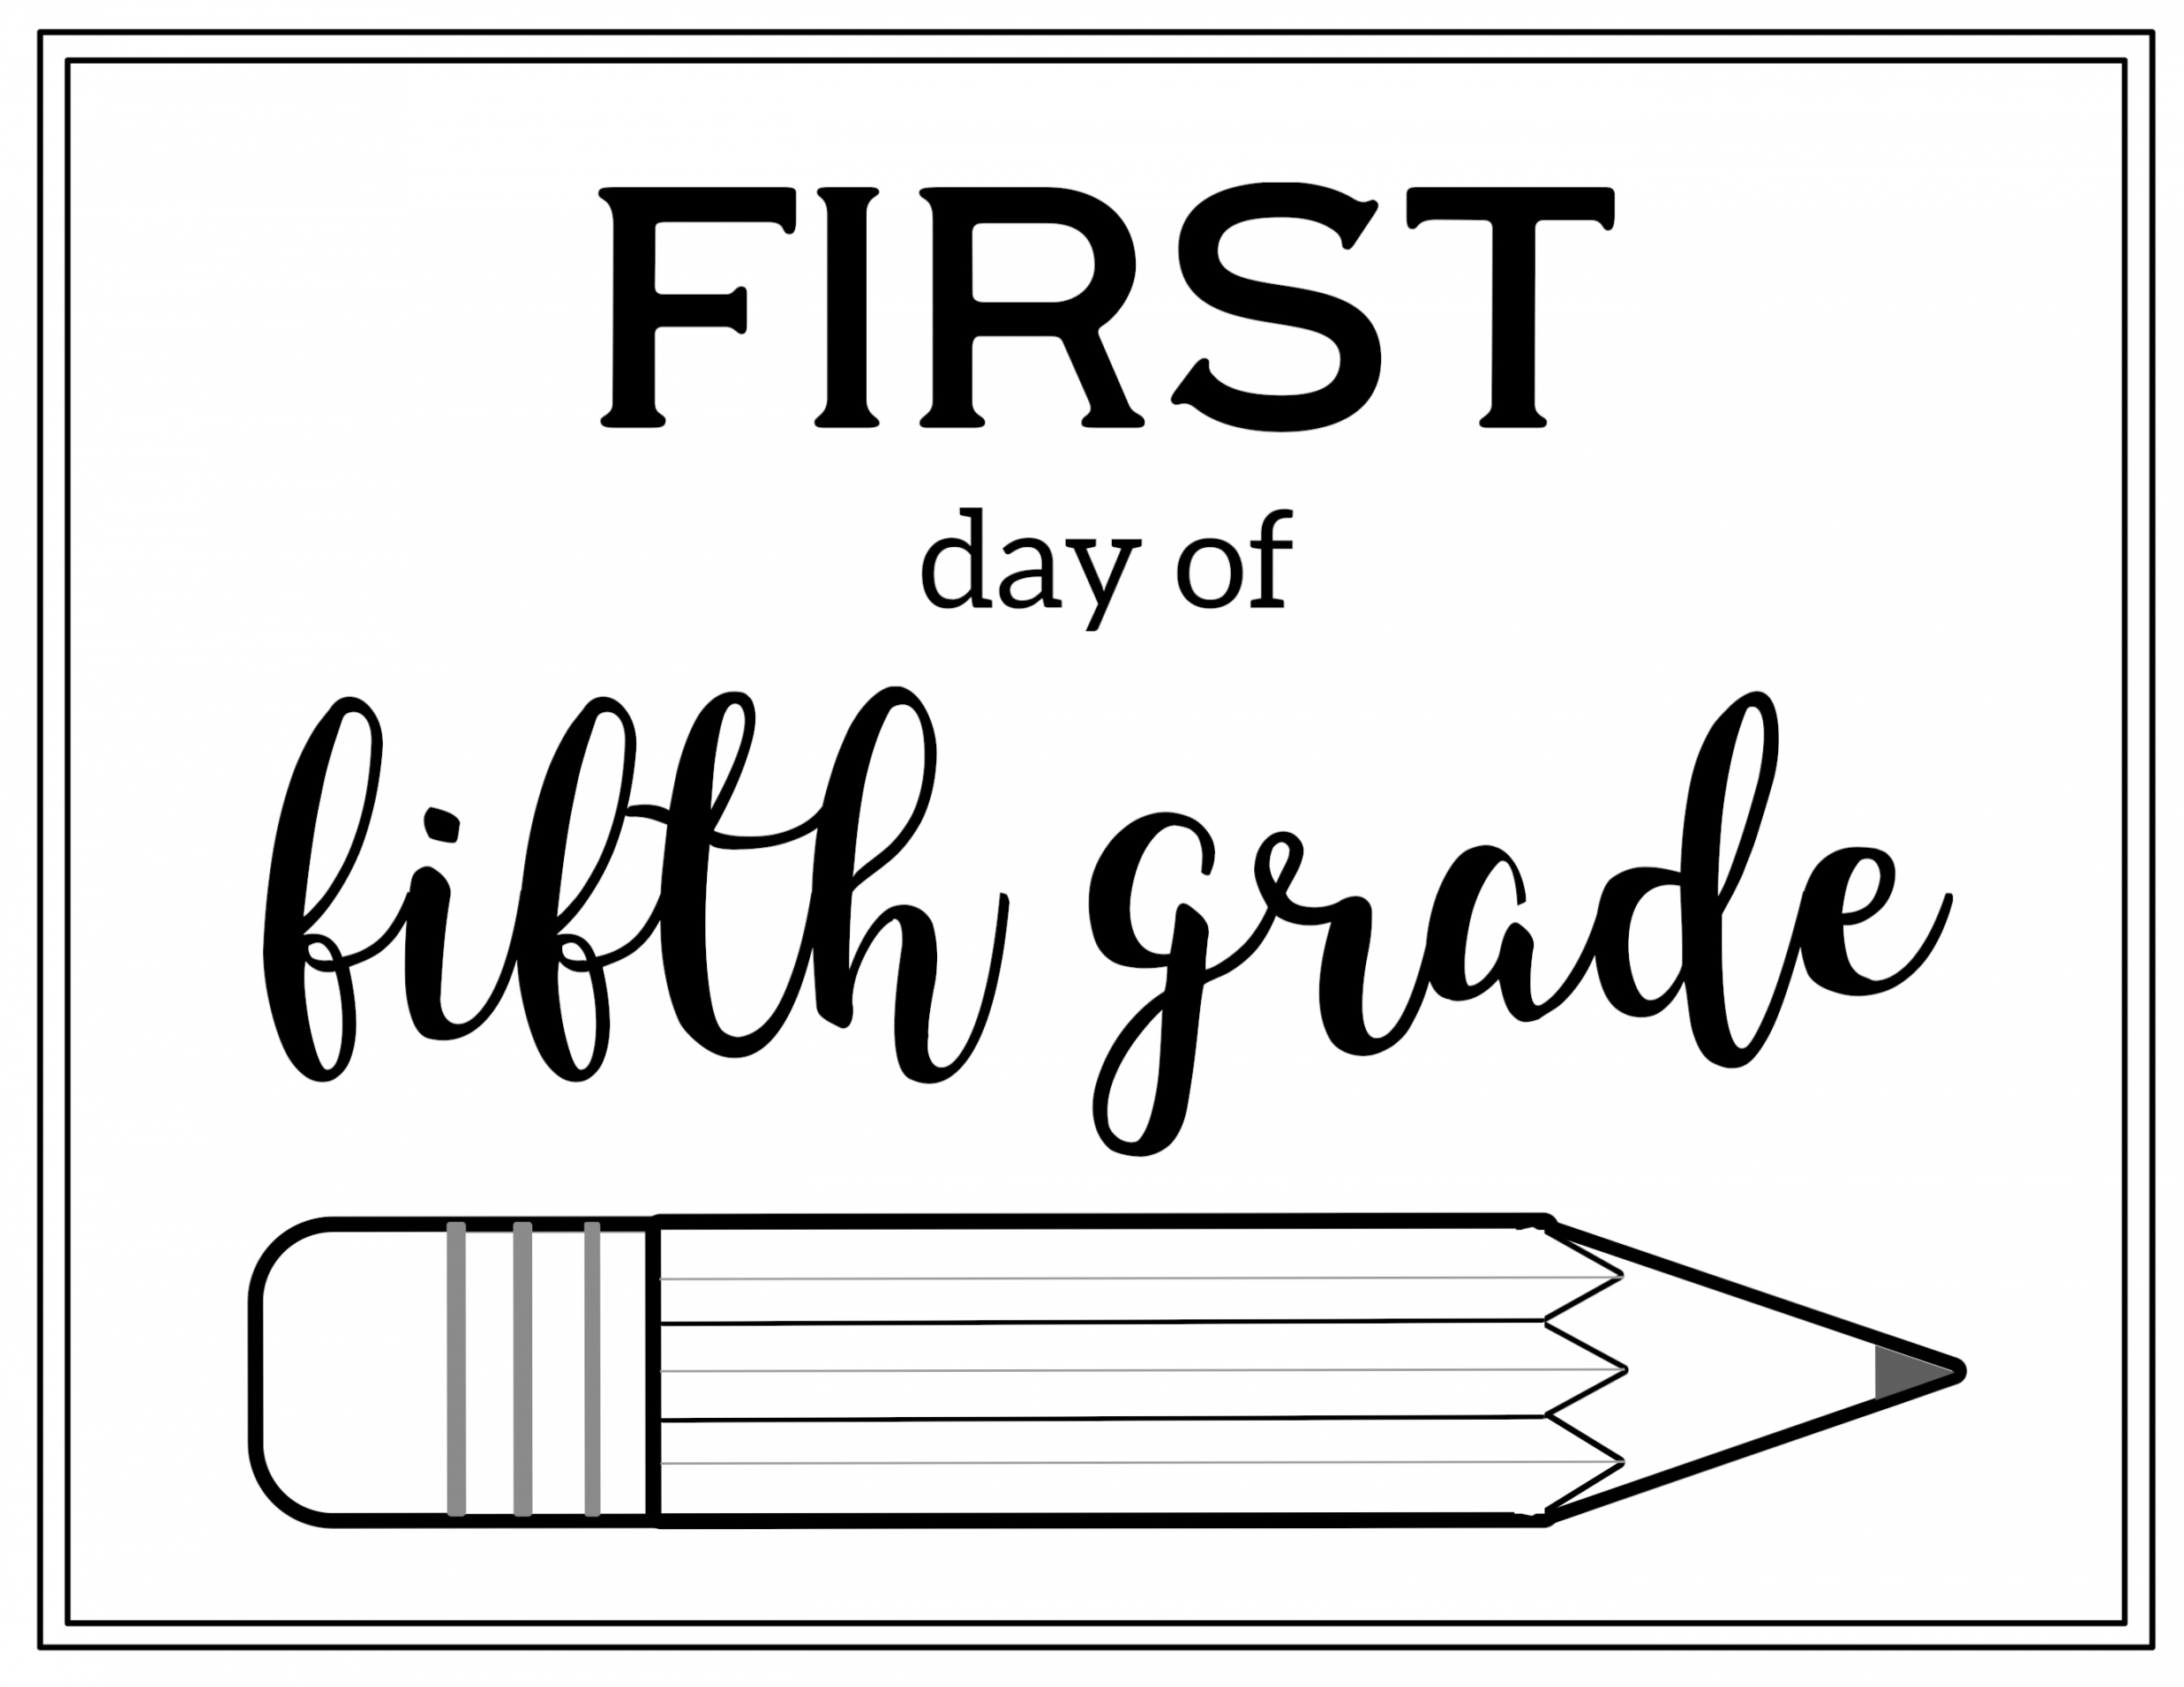 Free Printable First Day of School Sign Pencil - Paper Trail Design - FREE Printables - First Day Of 5th Grade Free Printable